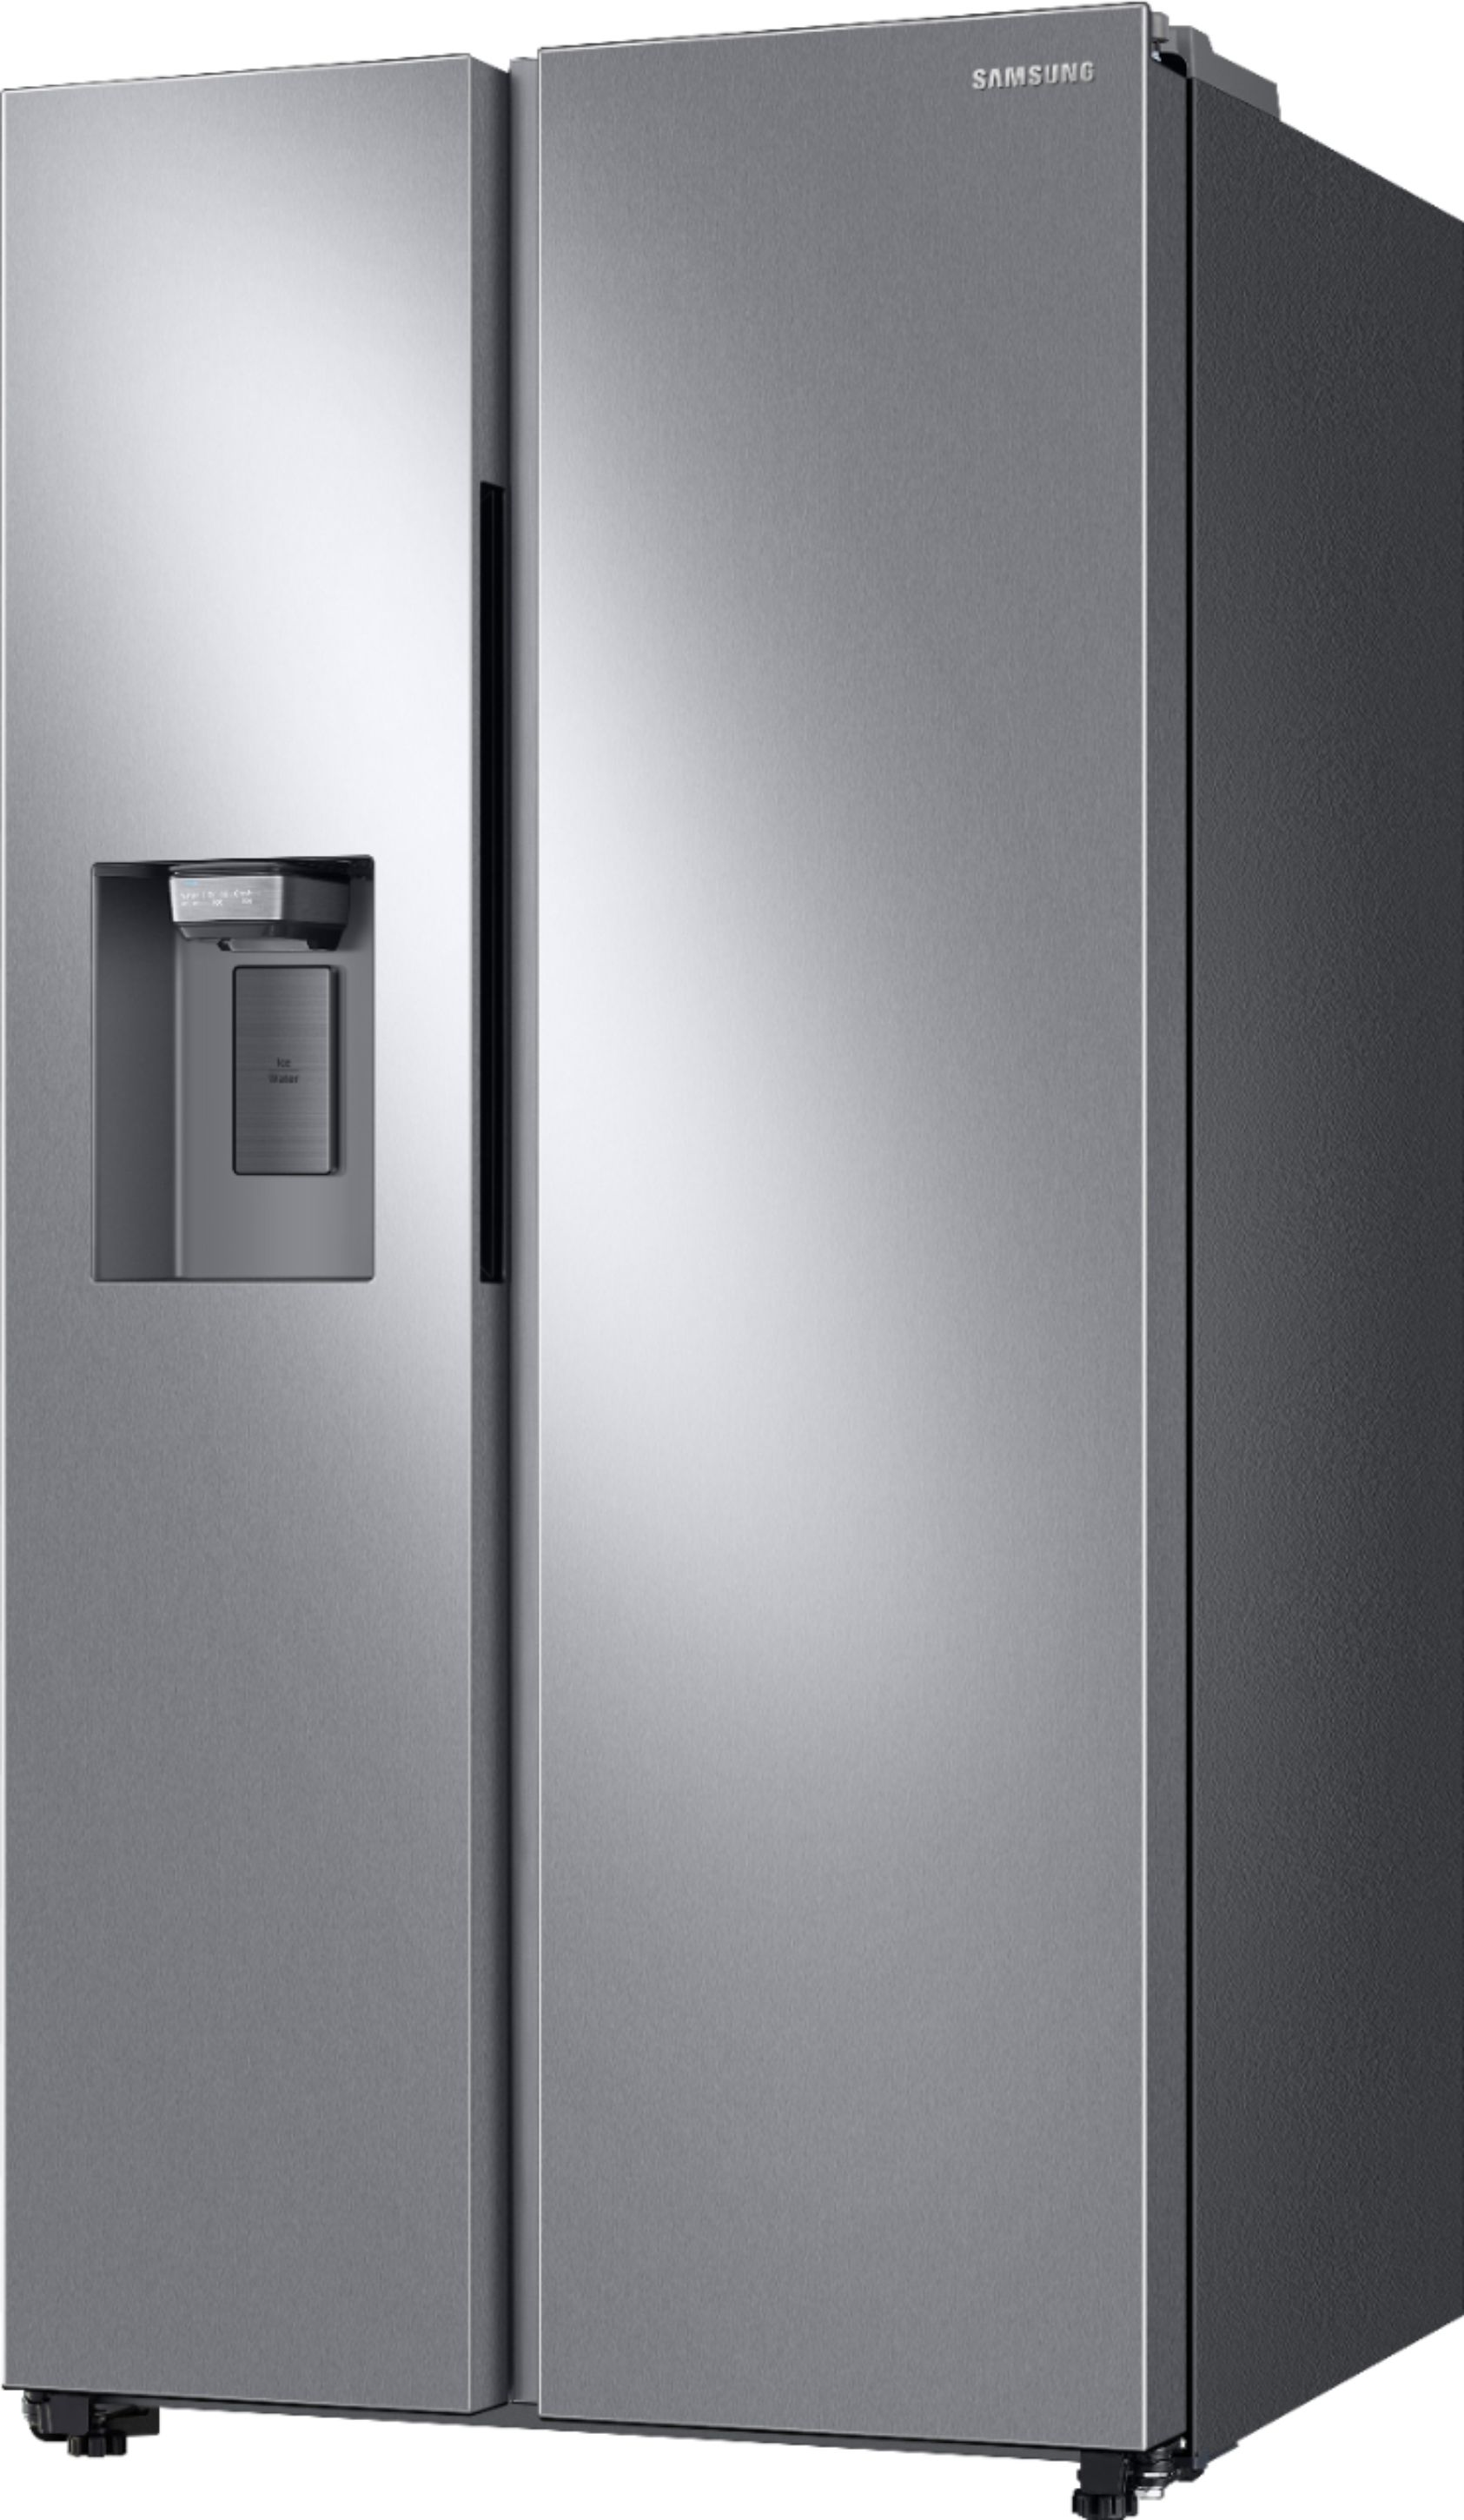 Customer Reviews: Samsung 27.4 cu. ft. Side-by-Side Refrigerator with ...